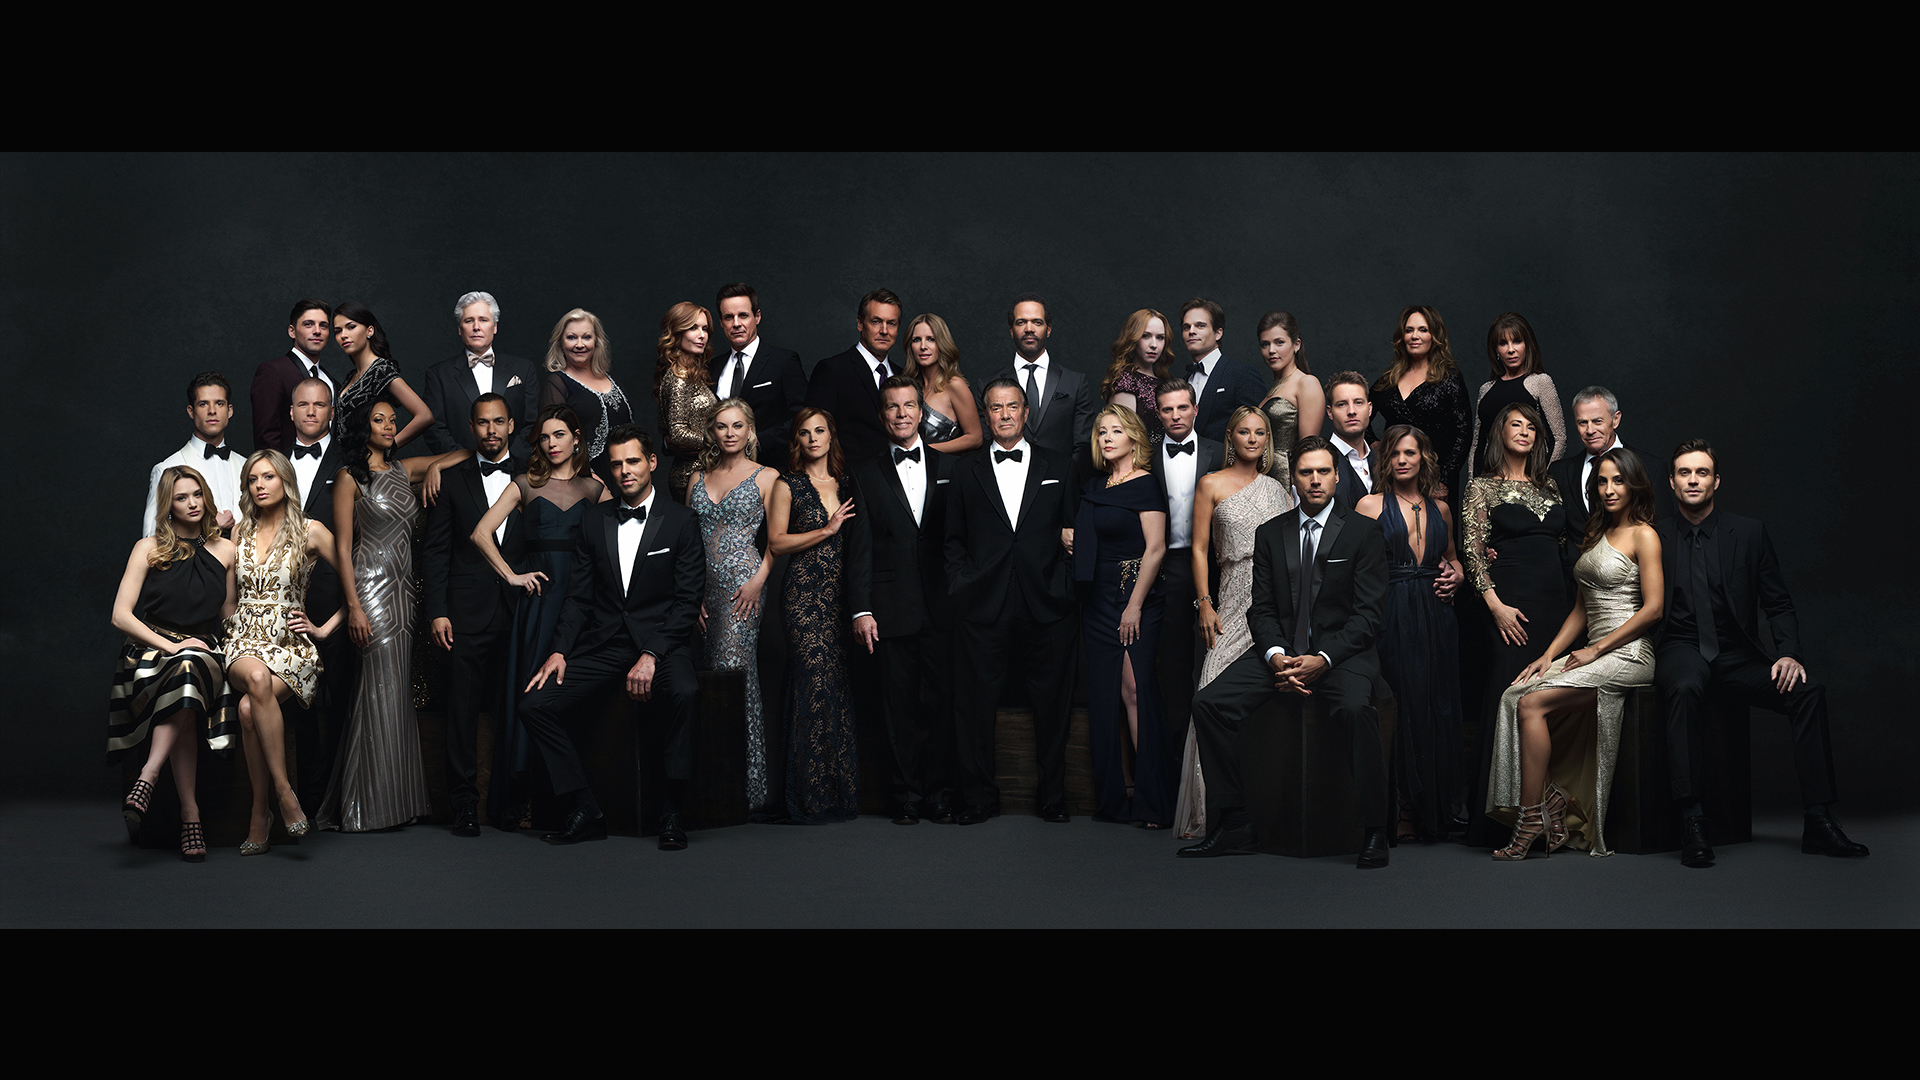 Video - The Young and the Restless - Cast Photo Behind the 